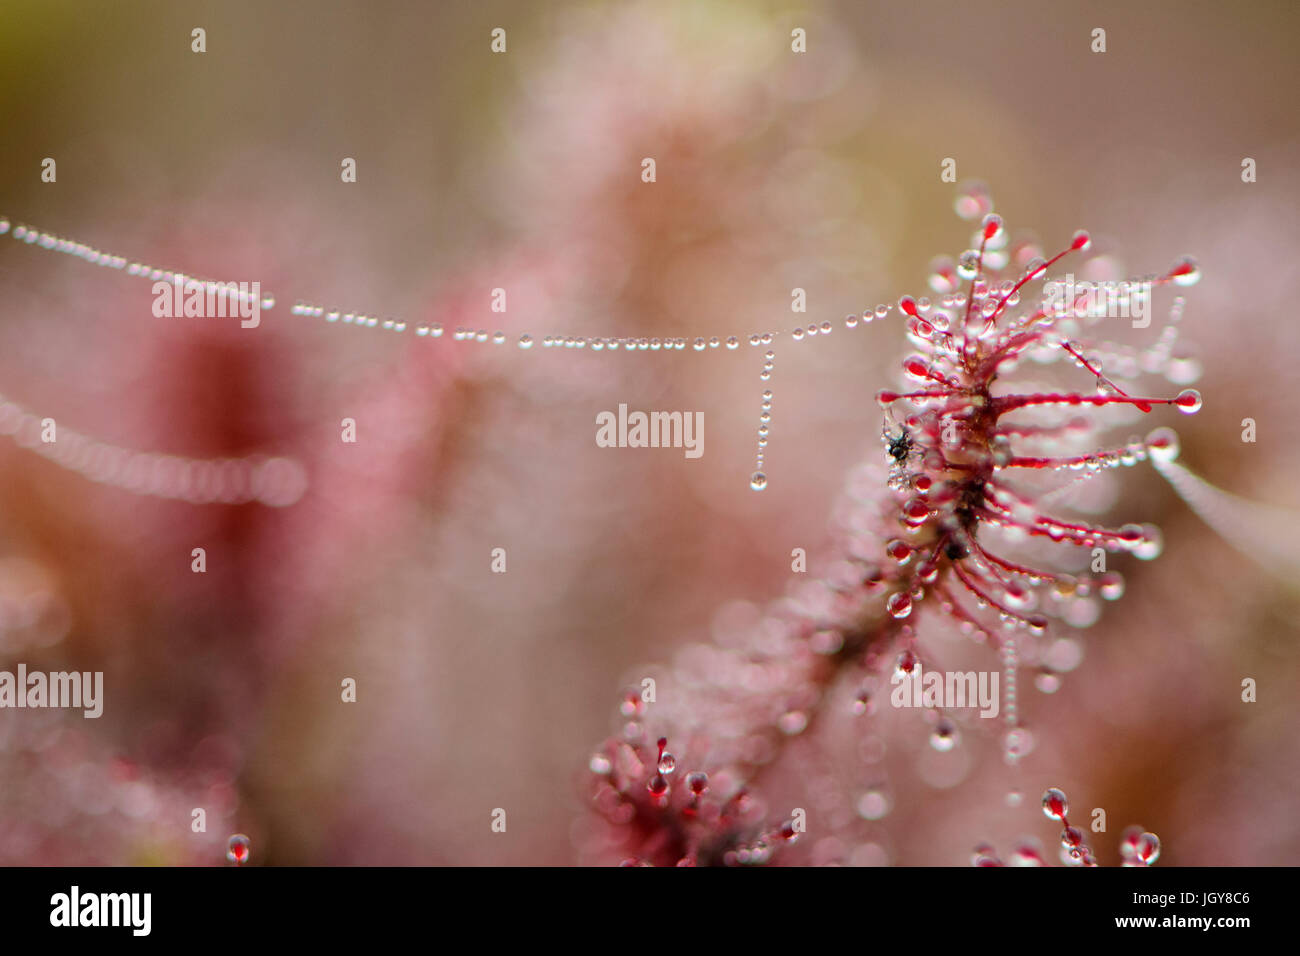 Oblong leaved sundew with spider threads and dew droplets Stock Photo